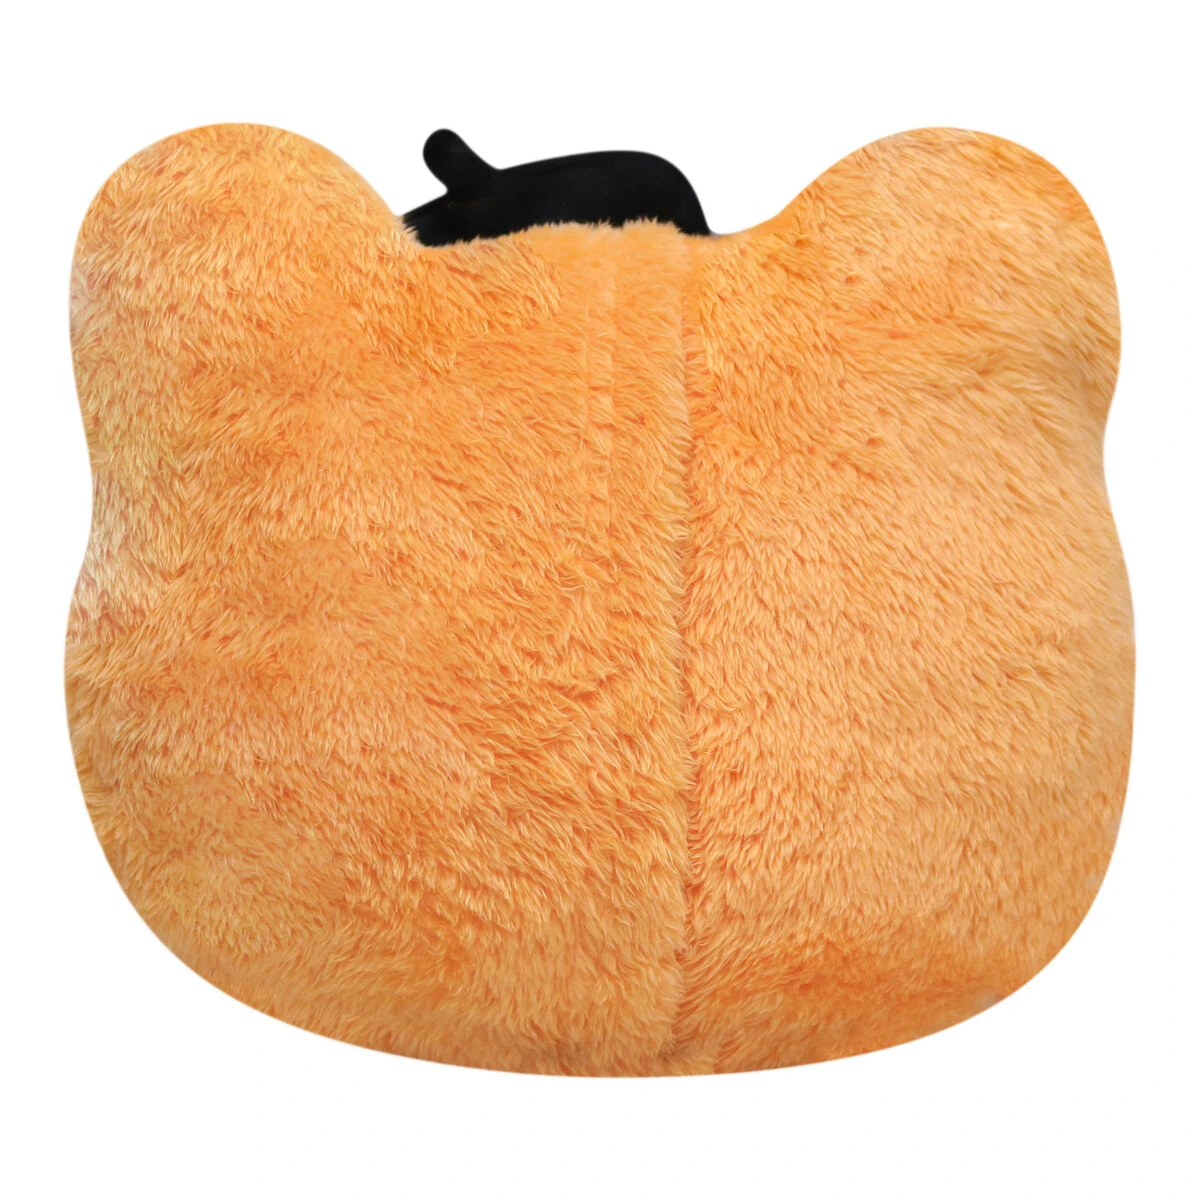 Pol V2 (Halloween Collection) 3D Embroidery Plush Pillow Blanket (Orange)